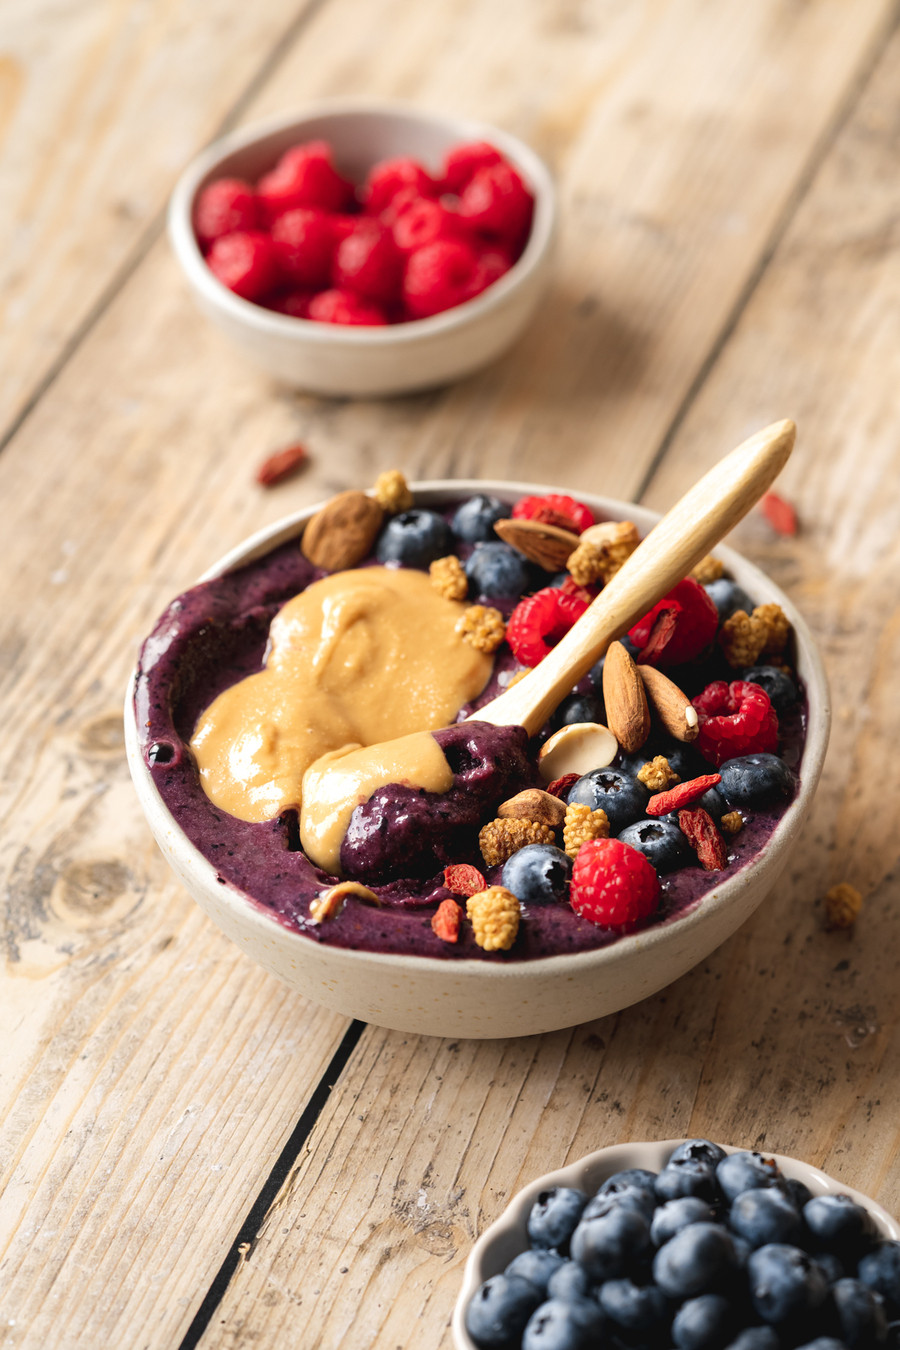 Acai Bowl, Raspberries and Almond Butter